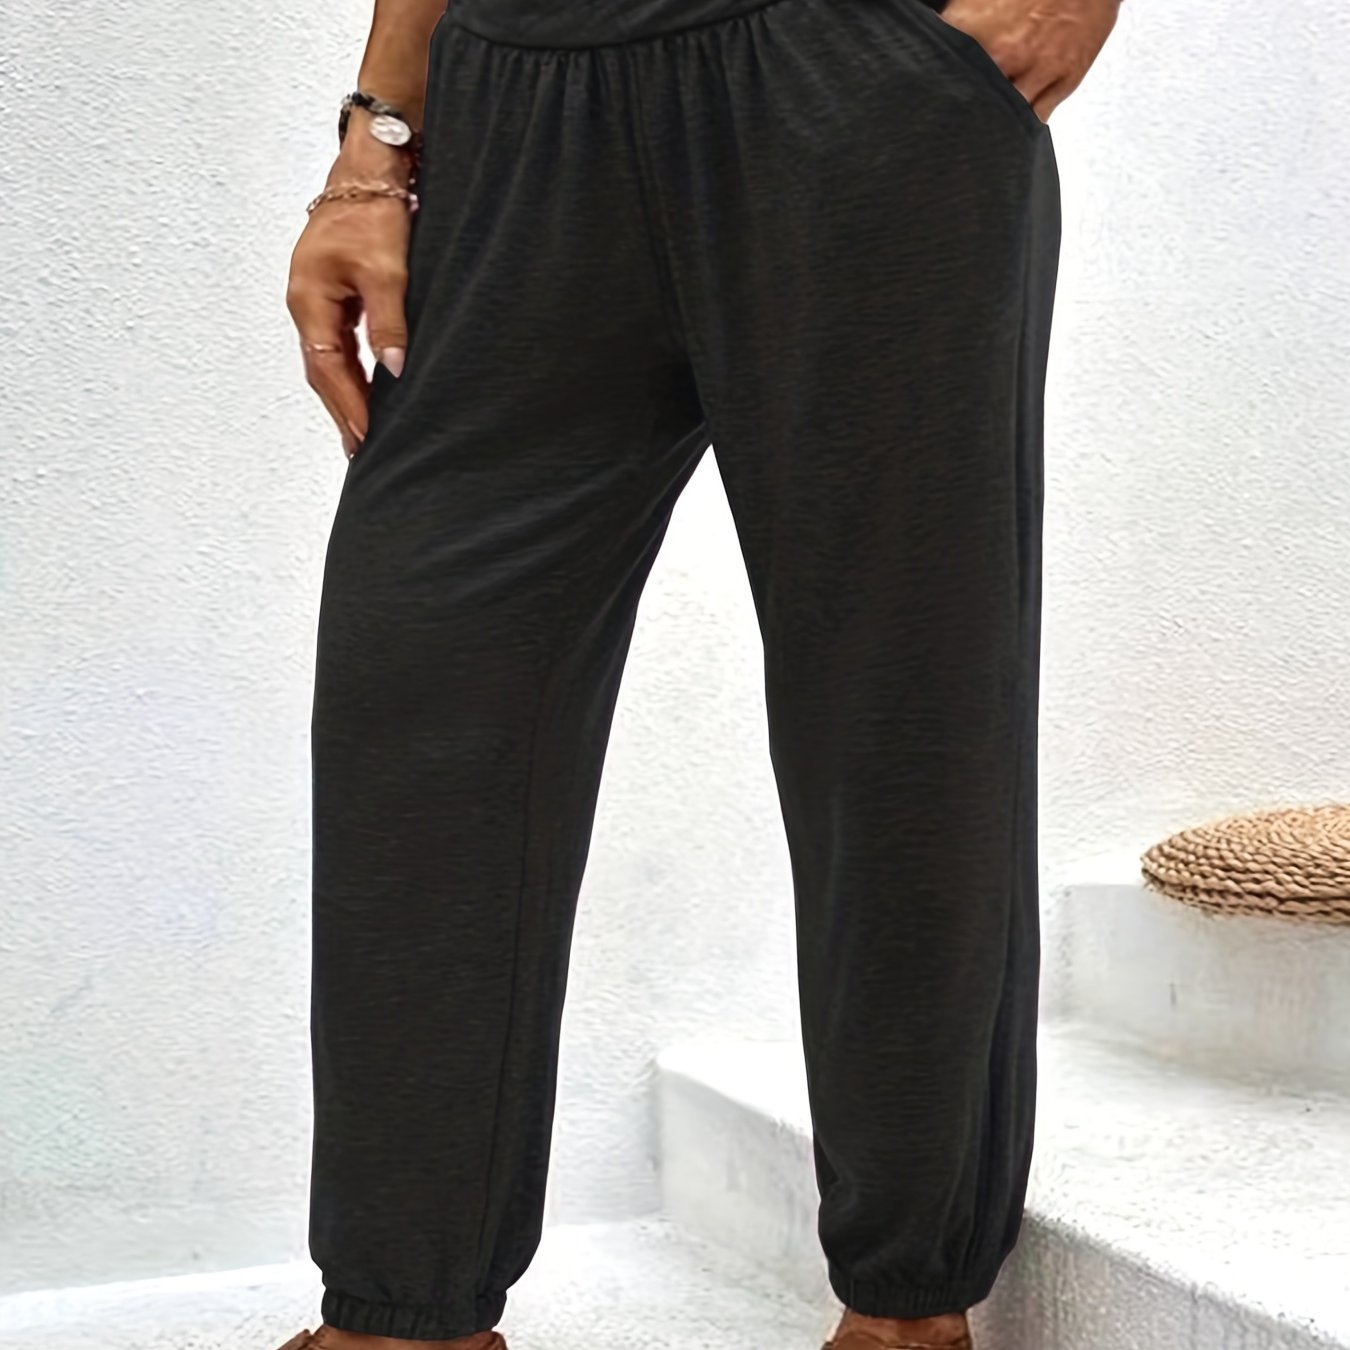 Plus Size Sporty Pants, Women's Plus Solid Tummy Control Slight Stretch Jogger Trousers With Pockets black